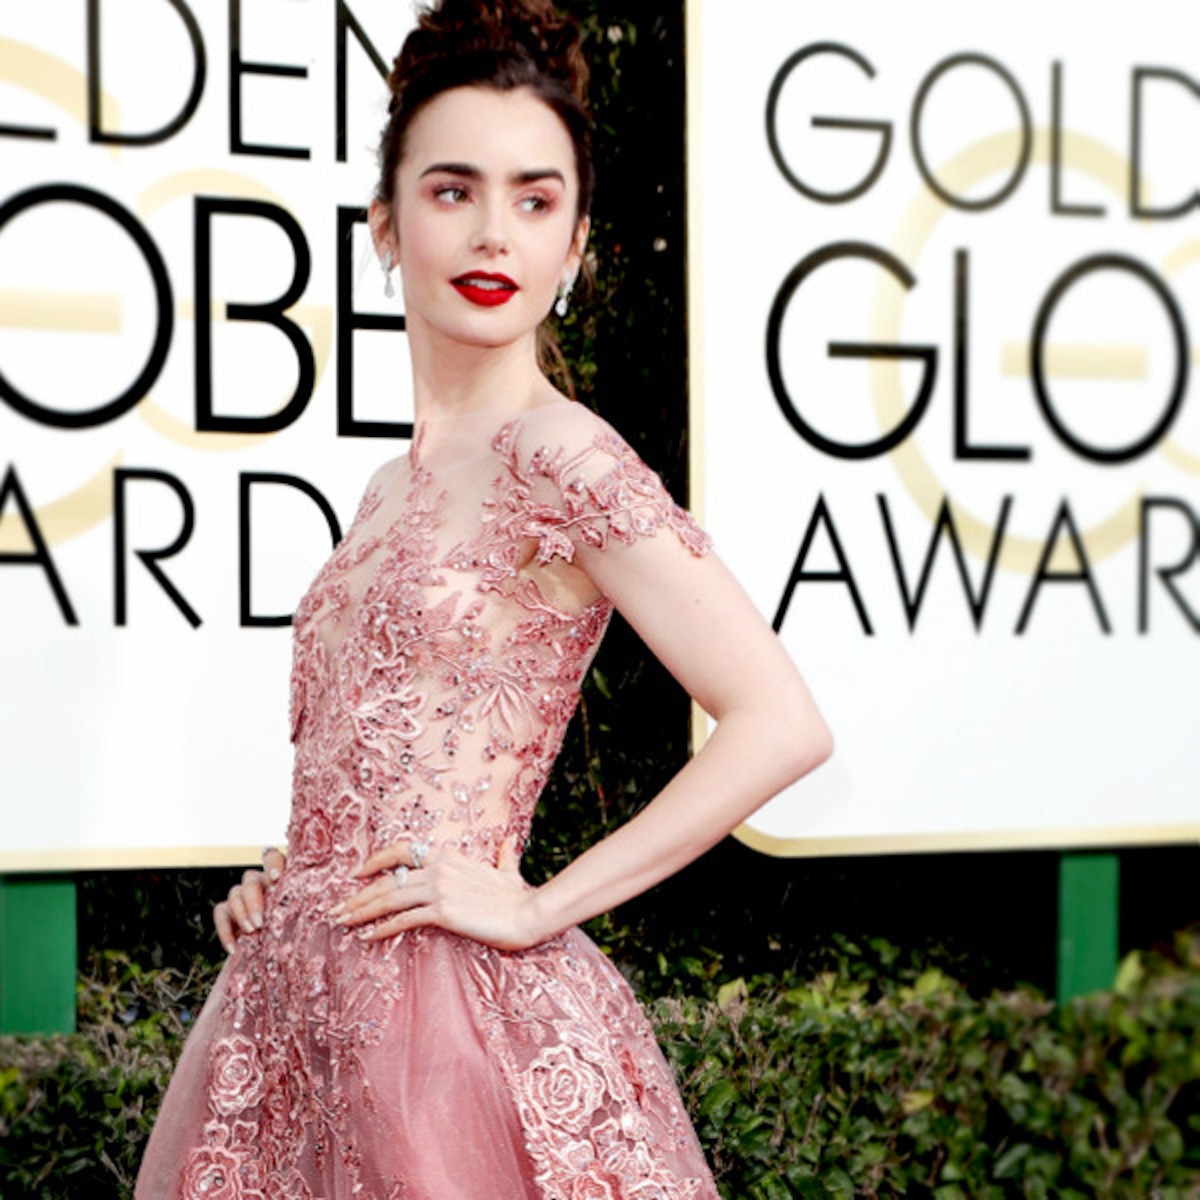 The Best Golden Globes Looks of All Time!